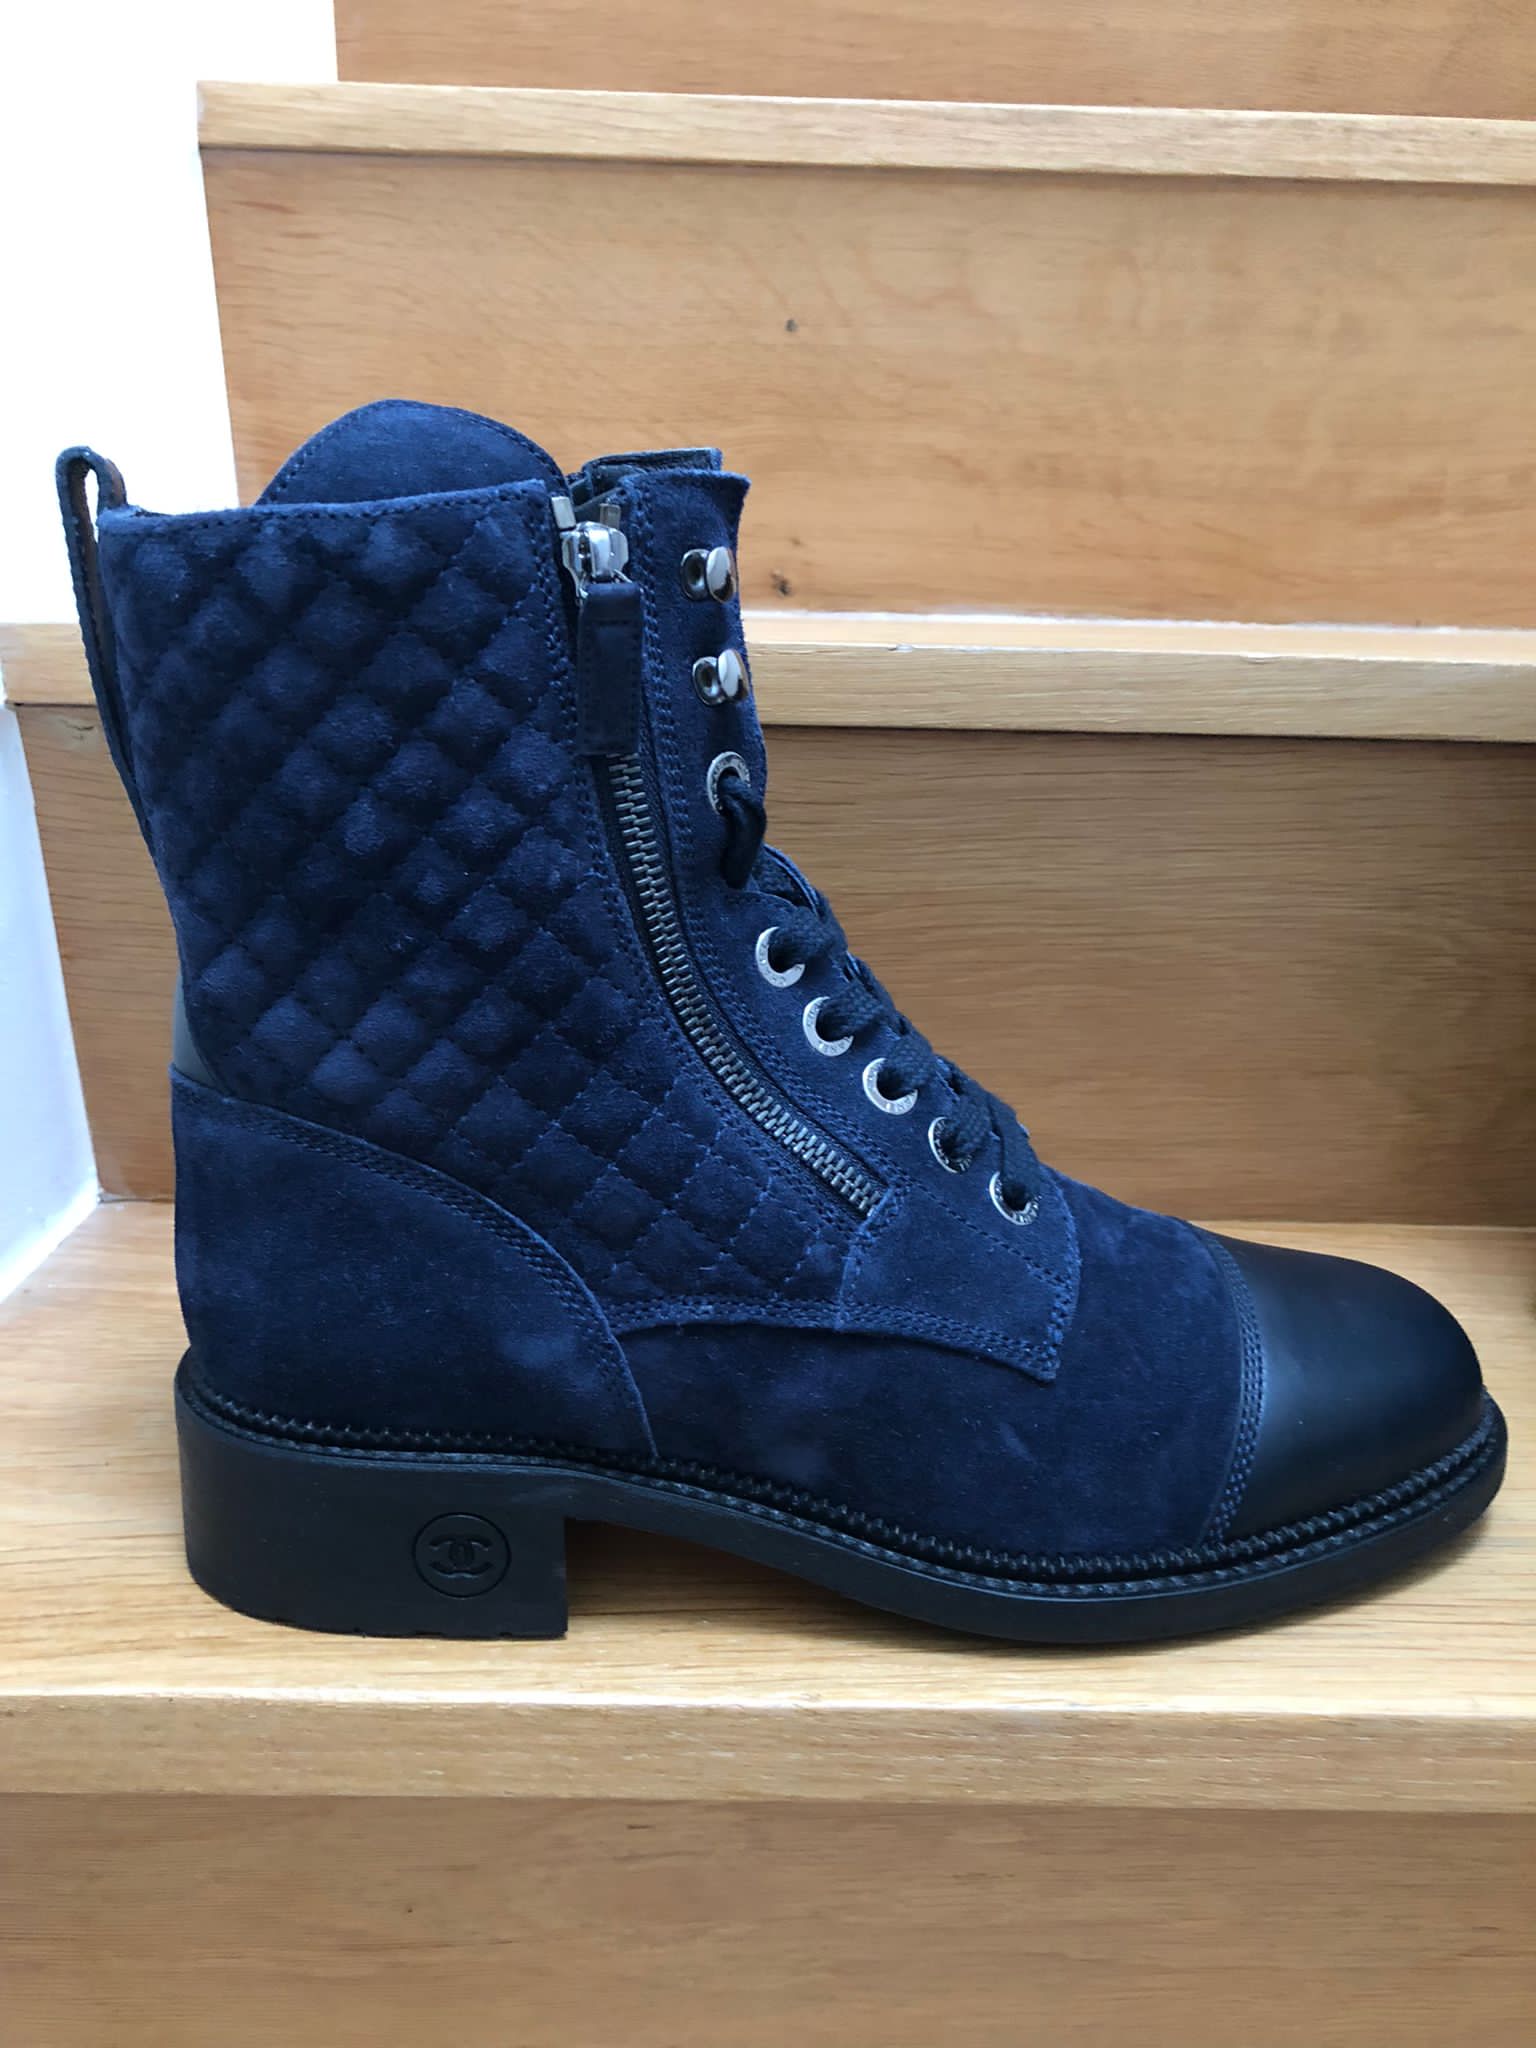 Chanel Boots in size EU 41 - Lou's Closet